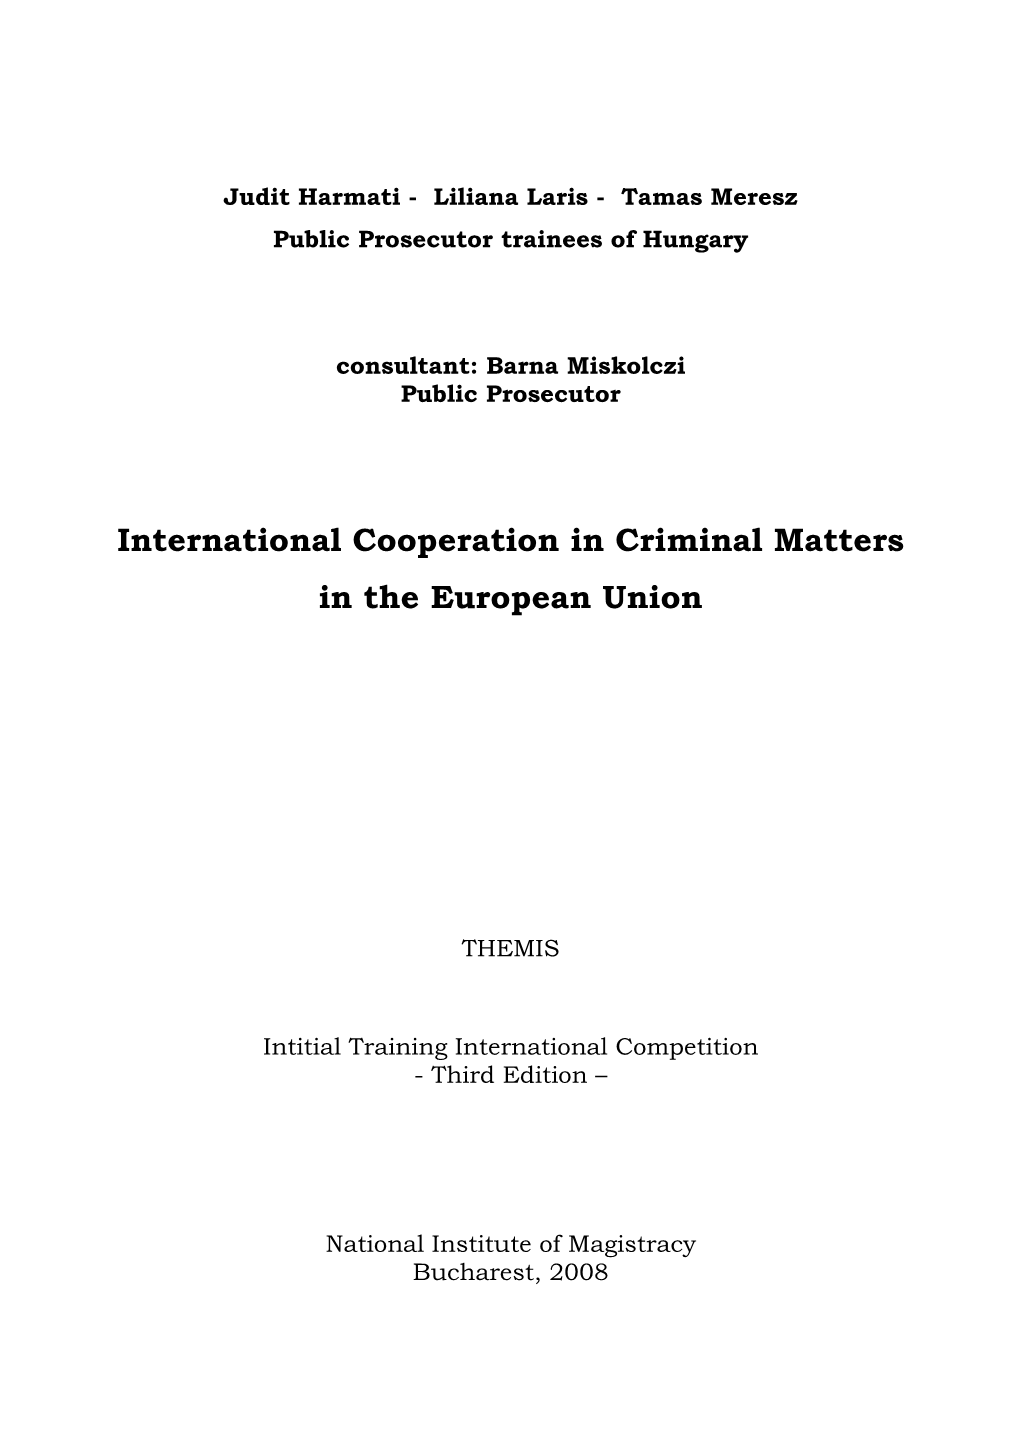 International Cooperation in Criminal Matters in the European Union